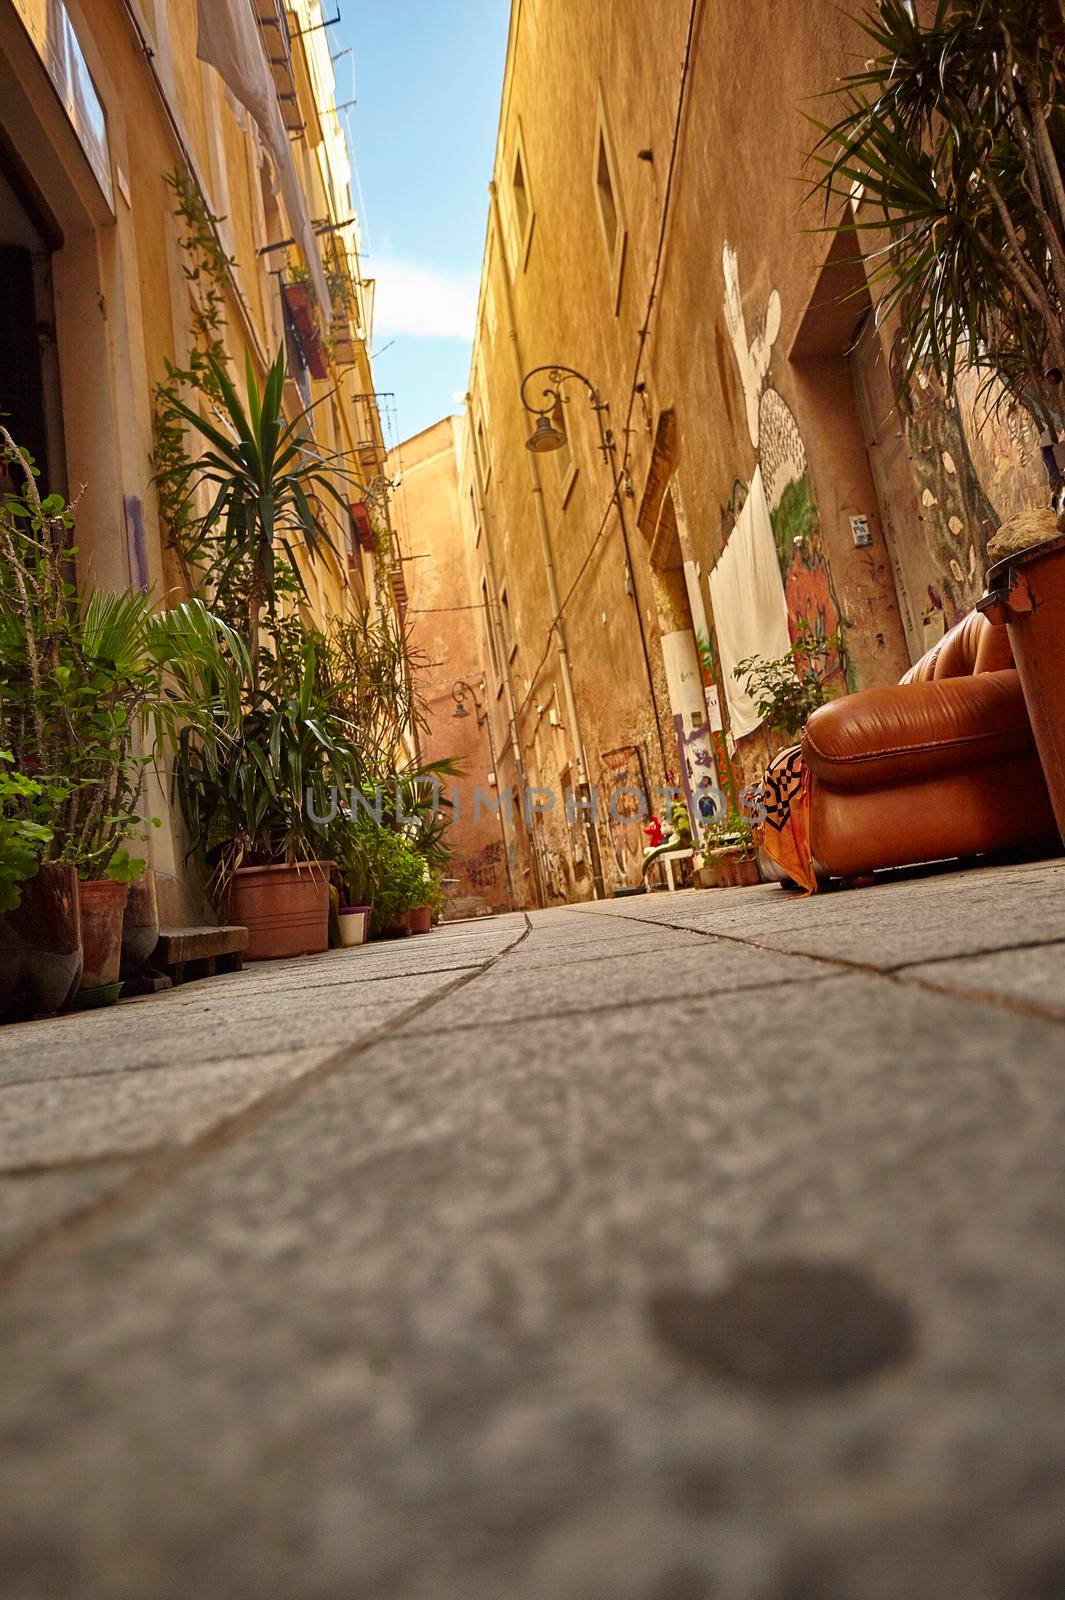 In the heart of Cagliari by pippocarlot